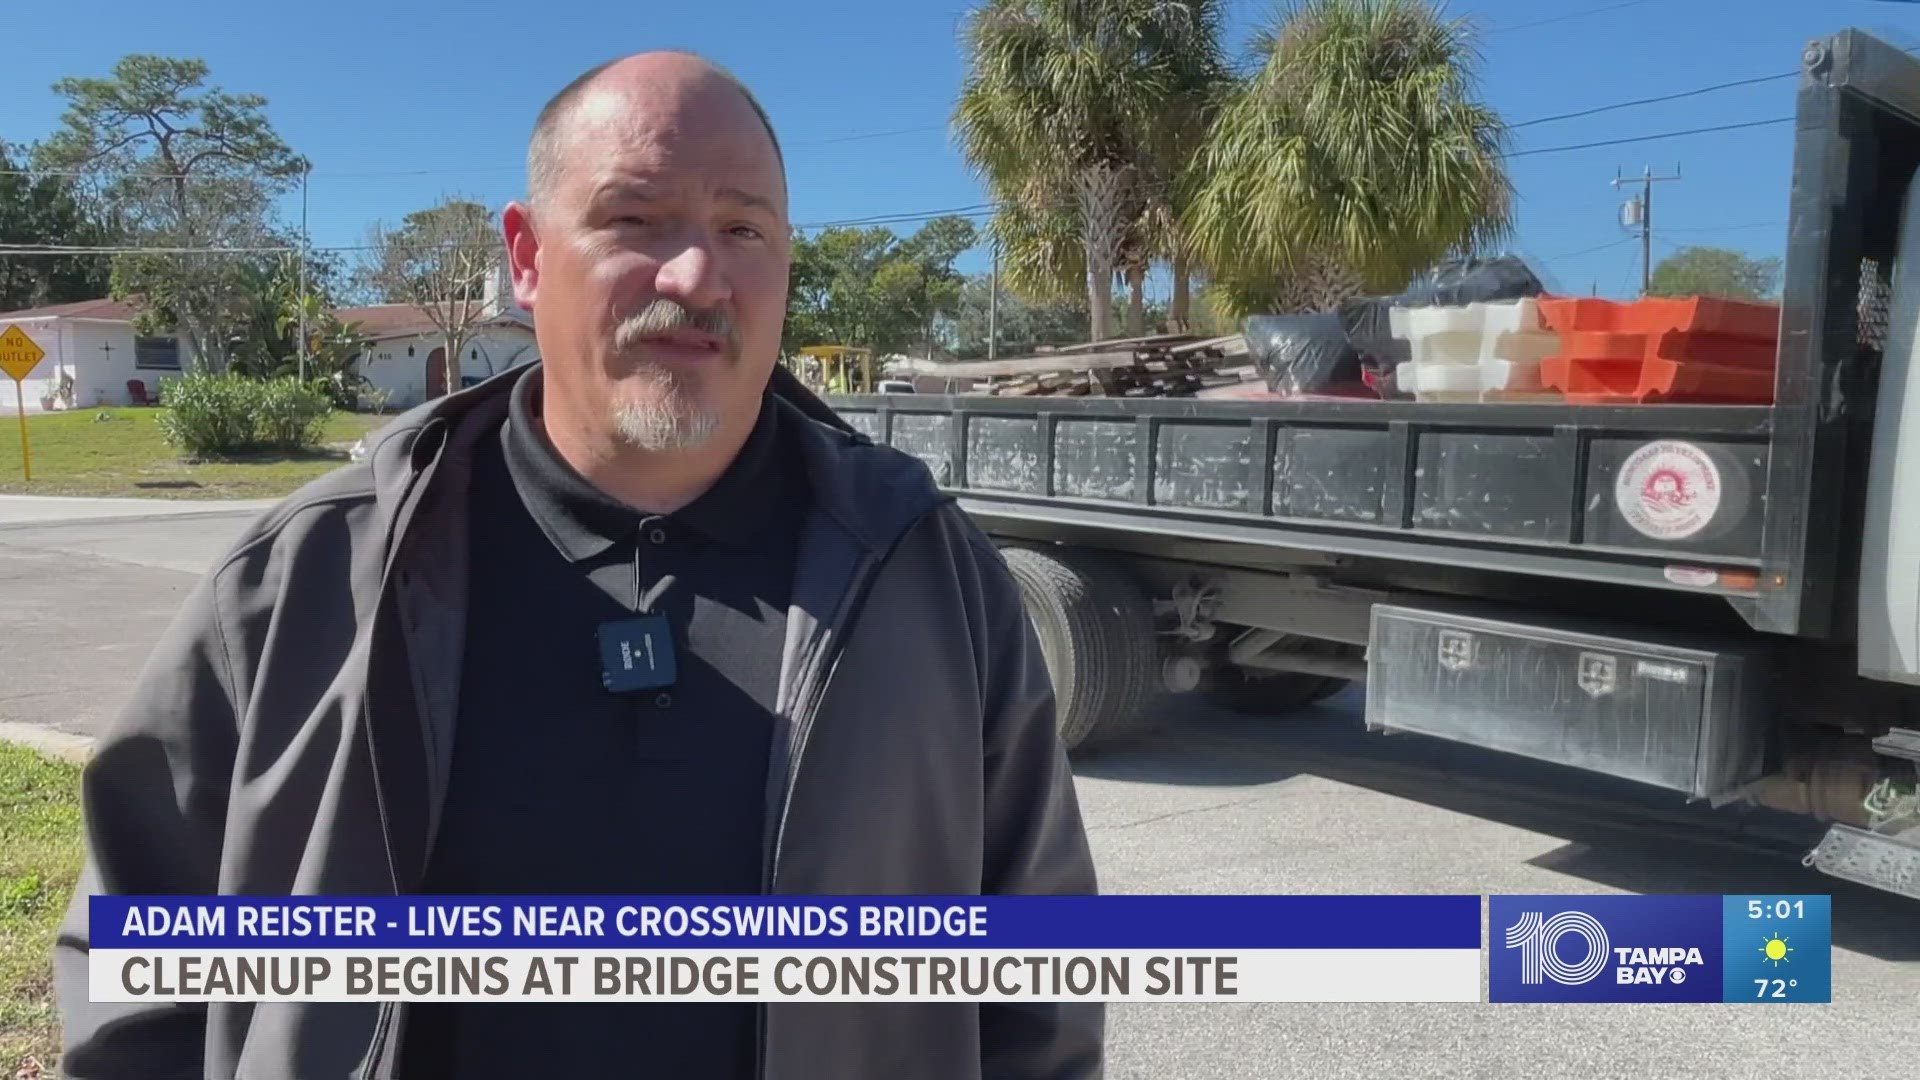 Pinellas County commissioners voted to terminate their contract with American Empire Builders citing unacceptable work.